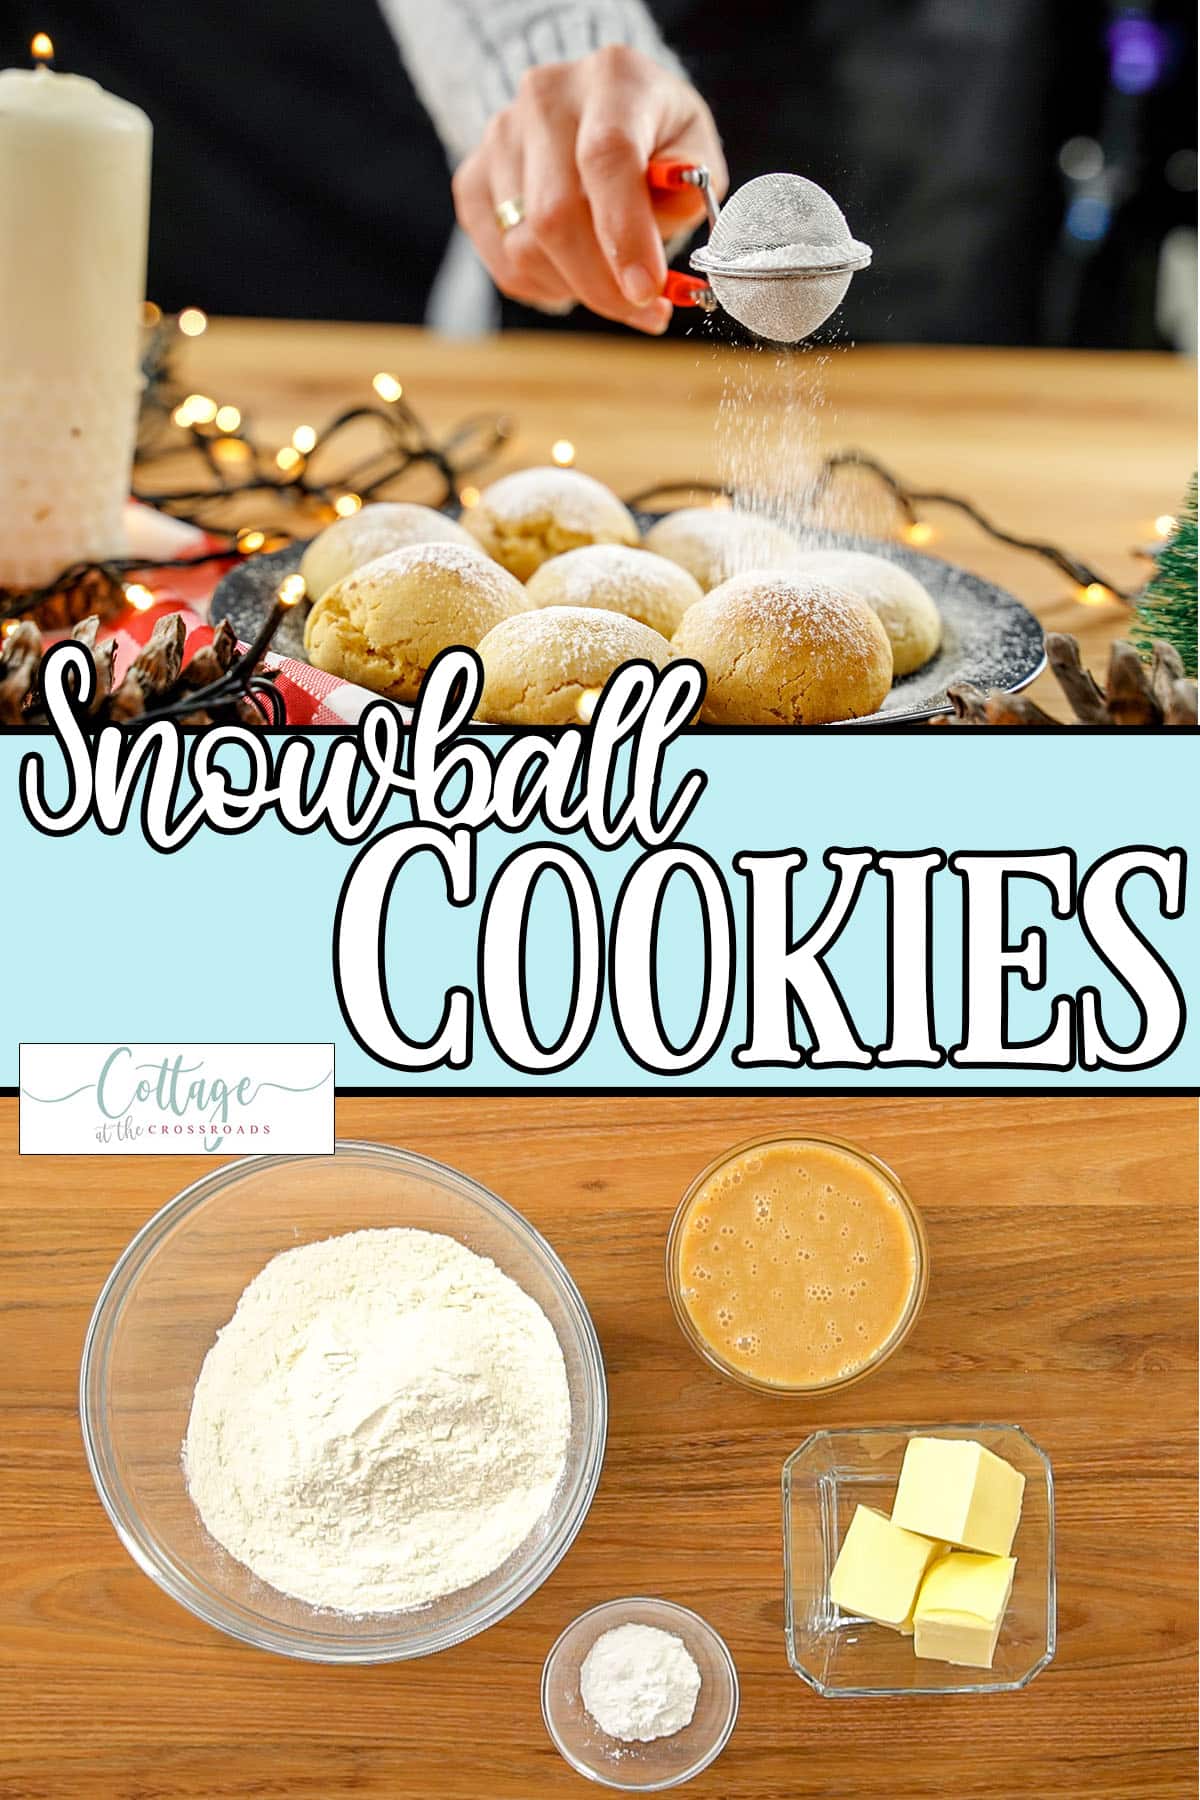 Photo collage of easy cookie ingredients and finished cookies with text which reads snowball cookies